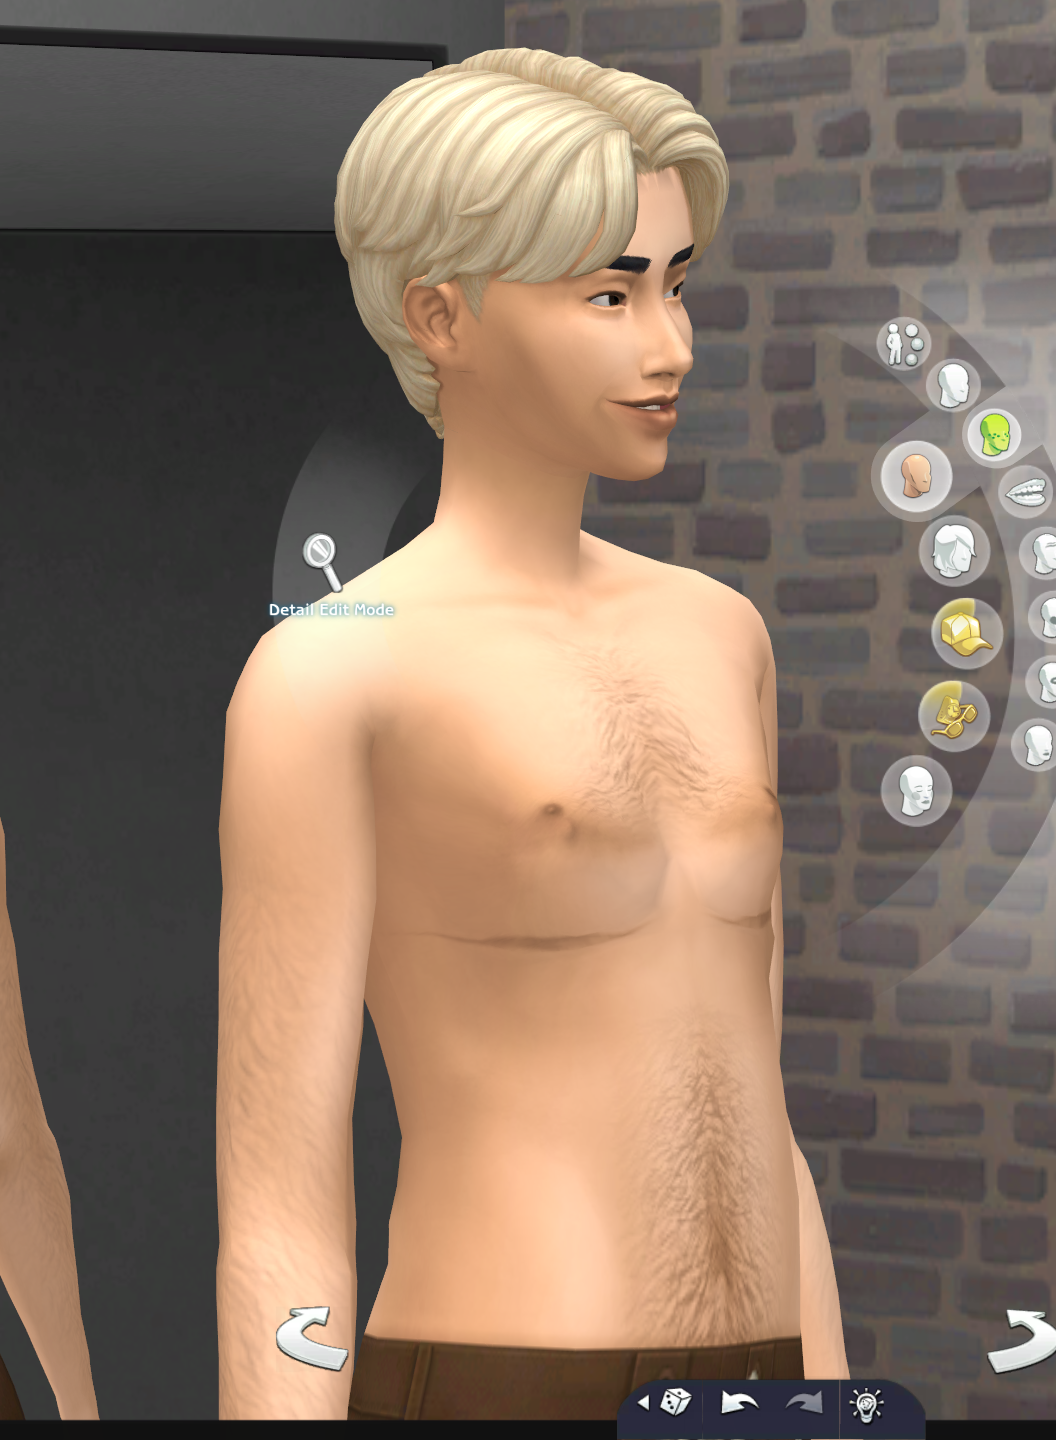 How To Remove Wickedwhims Added Female Breasts For A Femme Framed Ftm Sim The Sims 4 6791